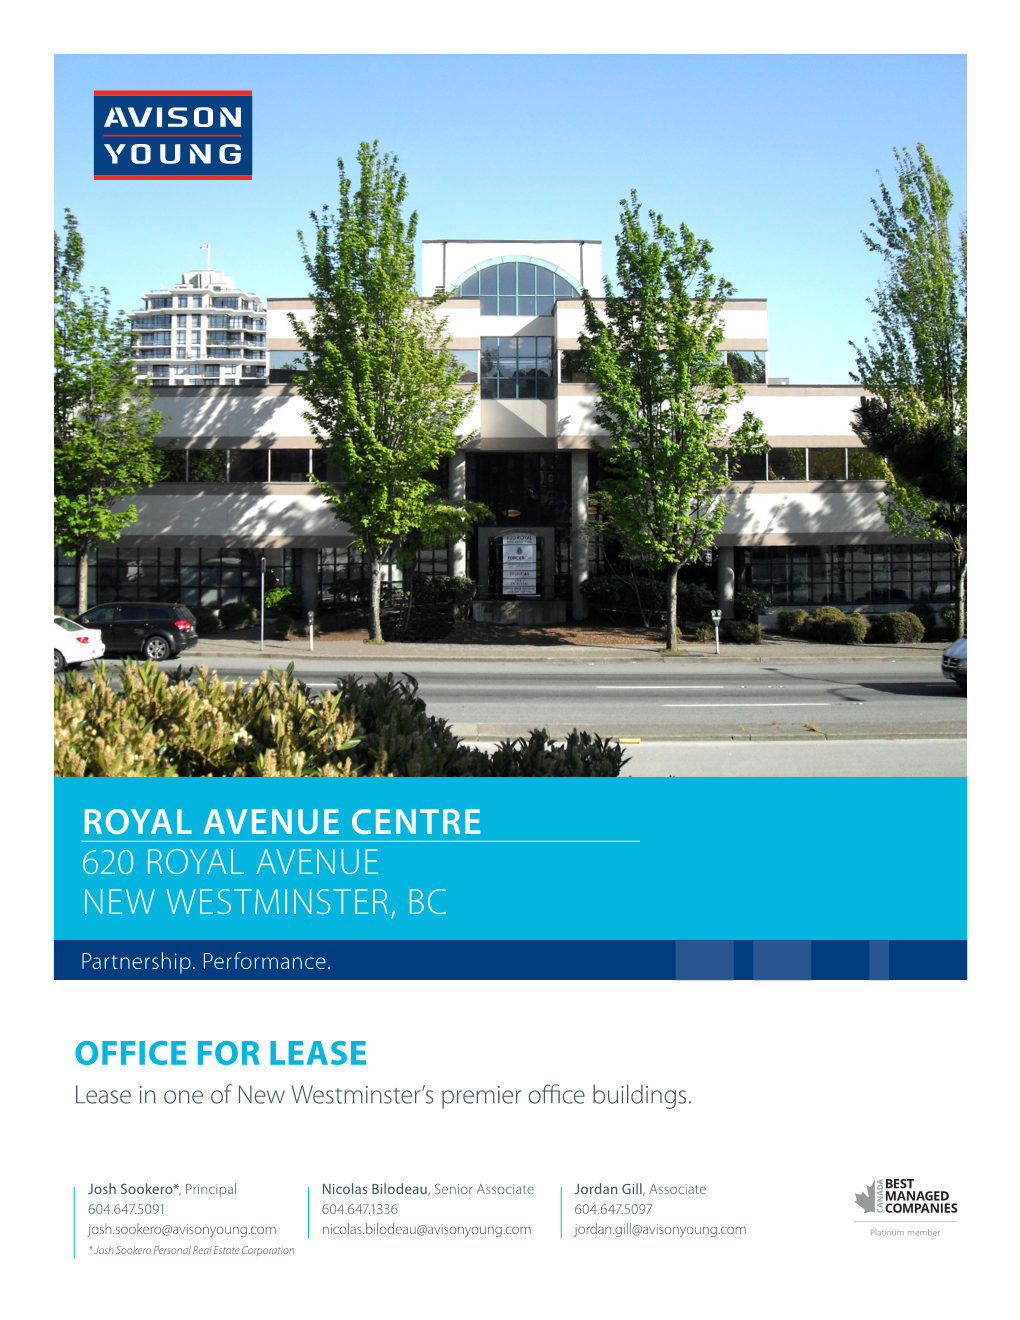 Royal Avenue Centre 620 Royal Avenue New Westminster, Bc